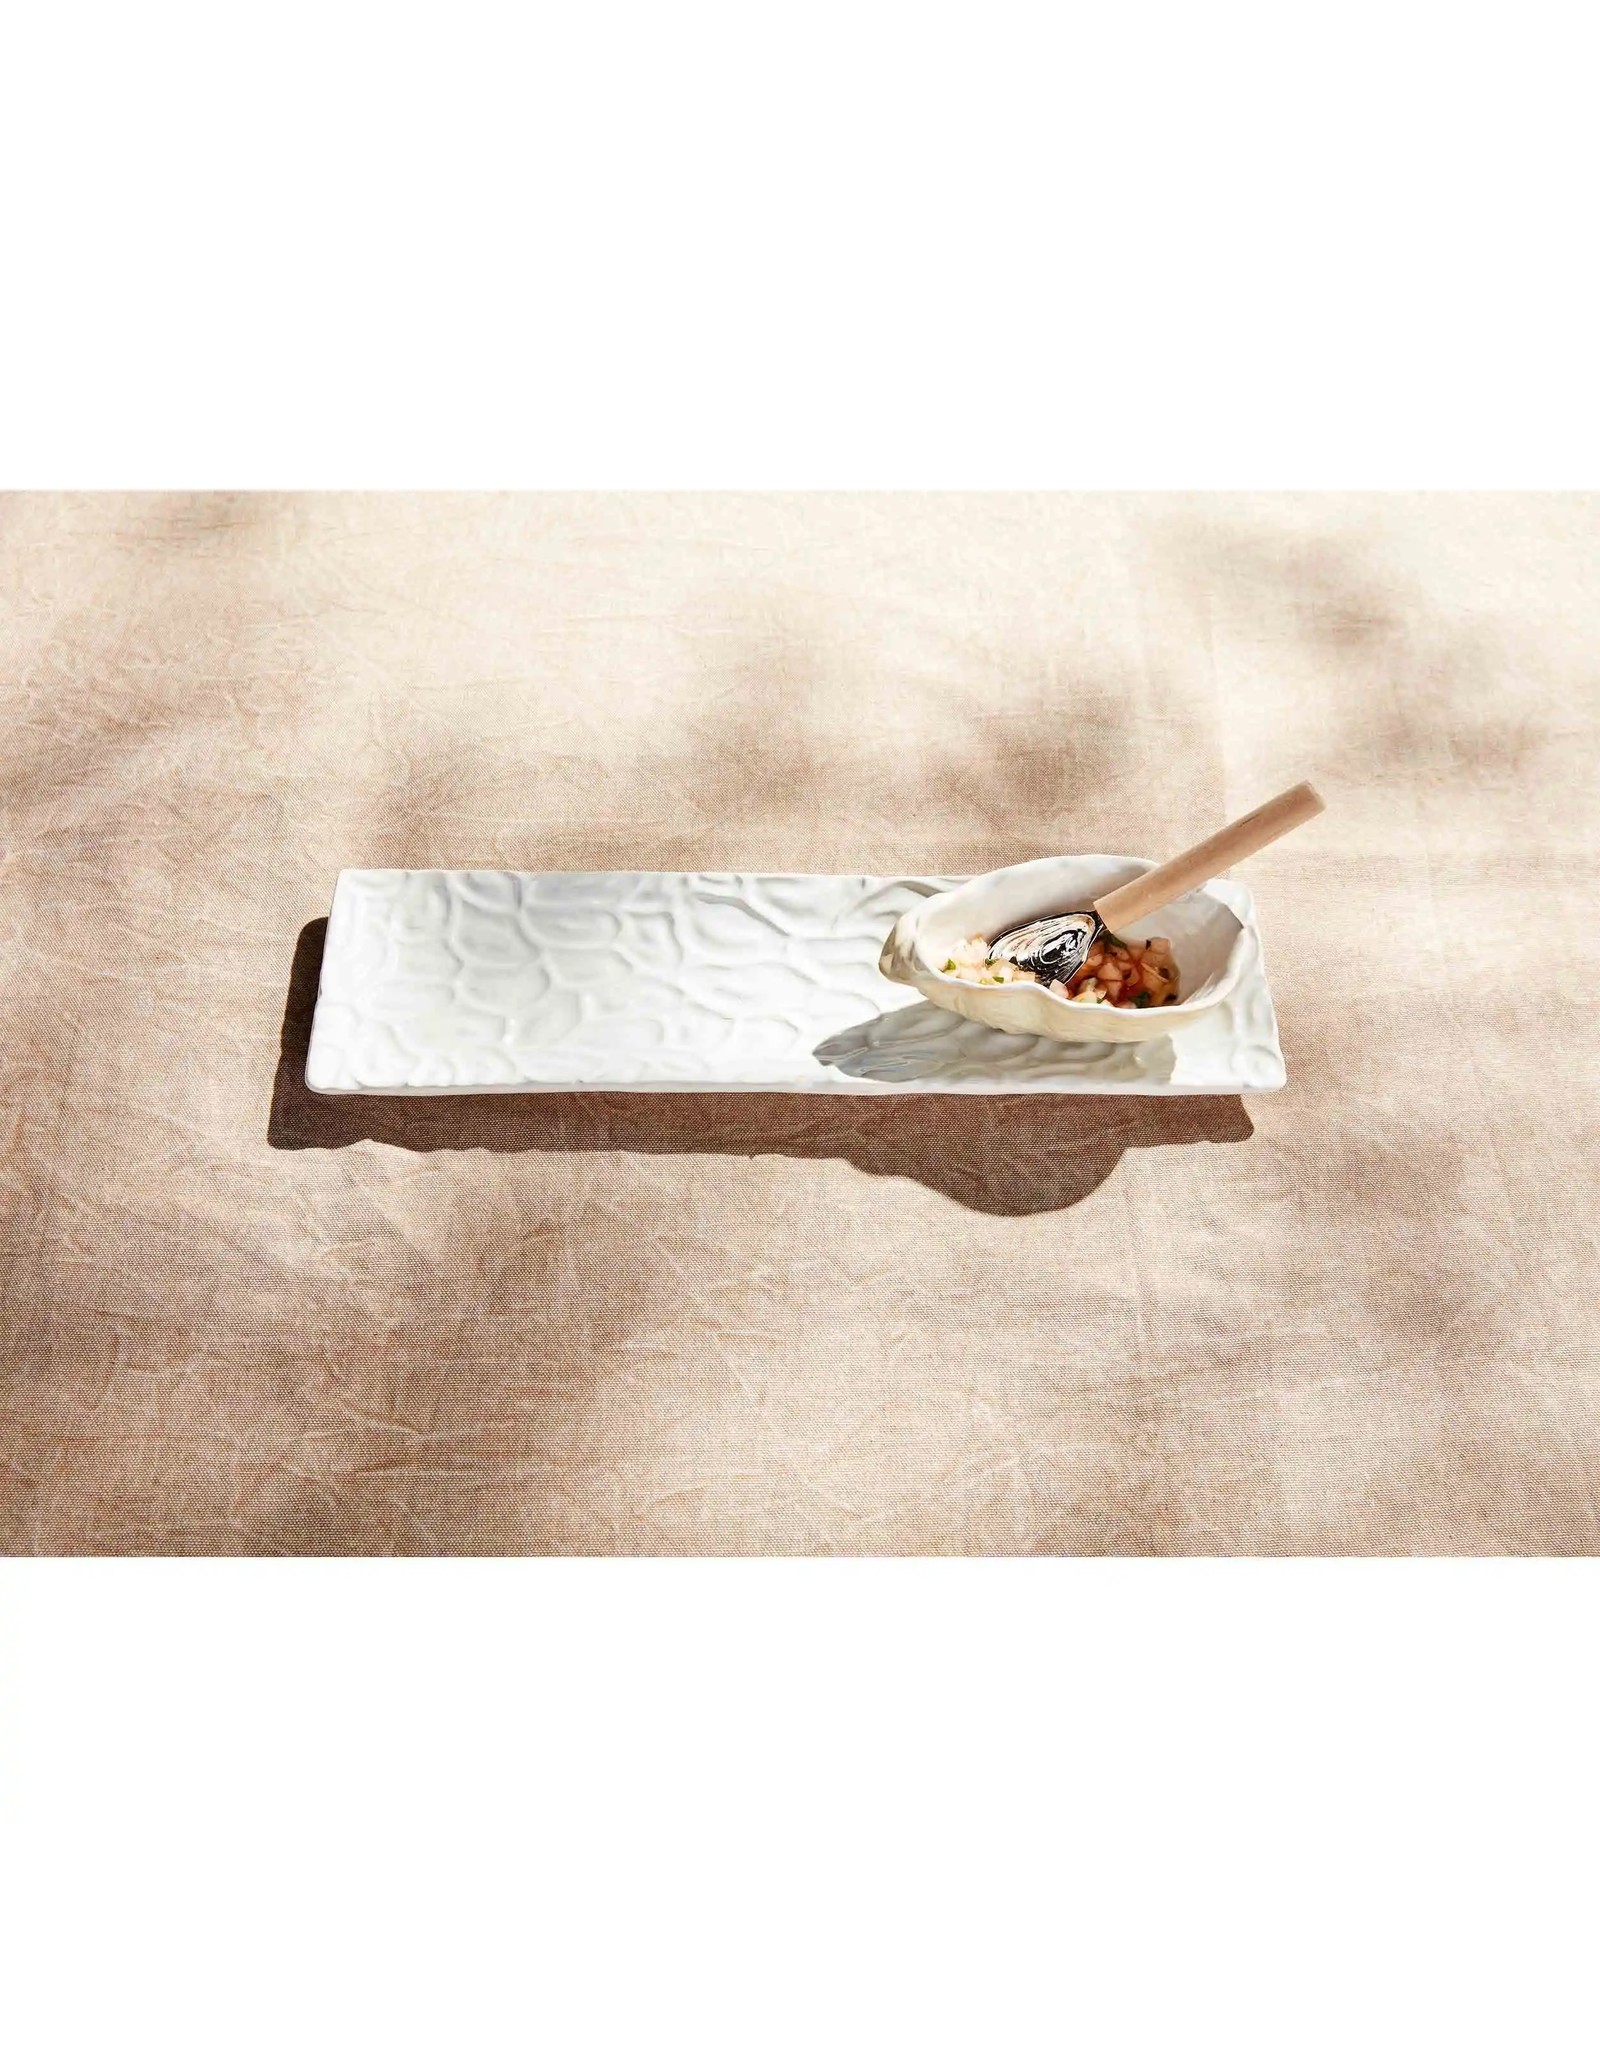 Mudpie Oyster Tray and Dip Set